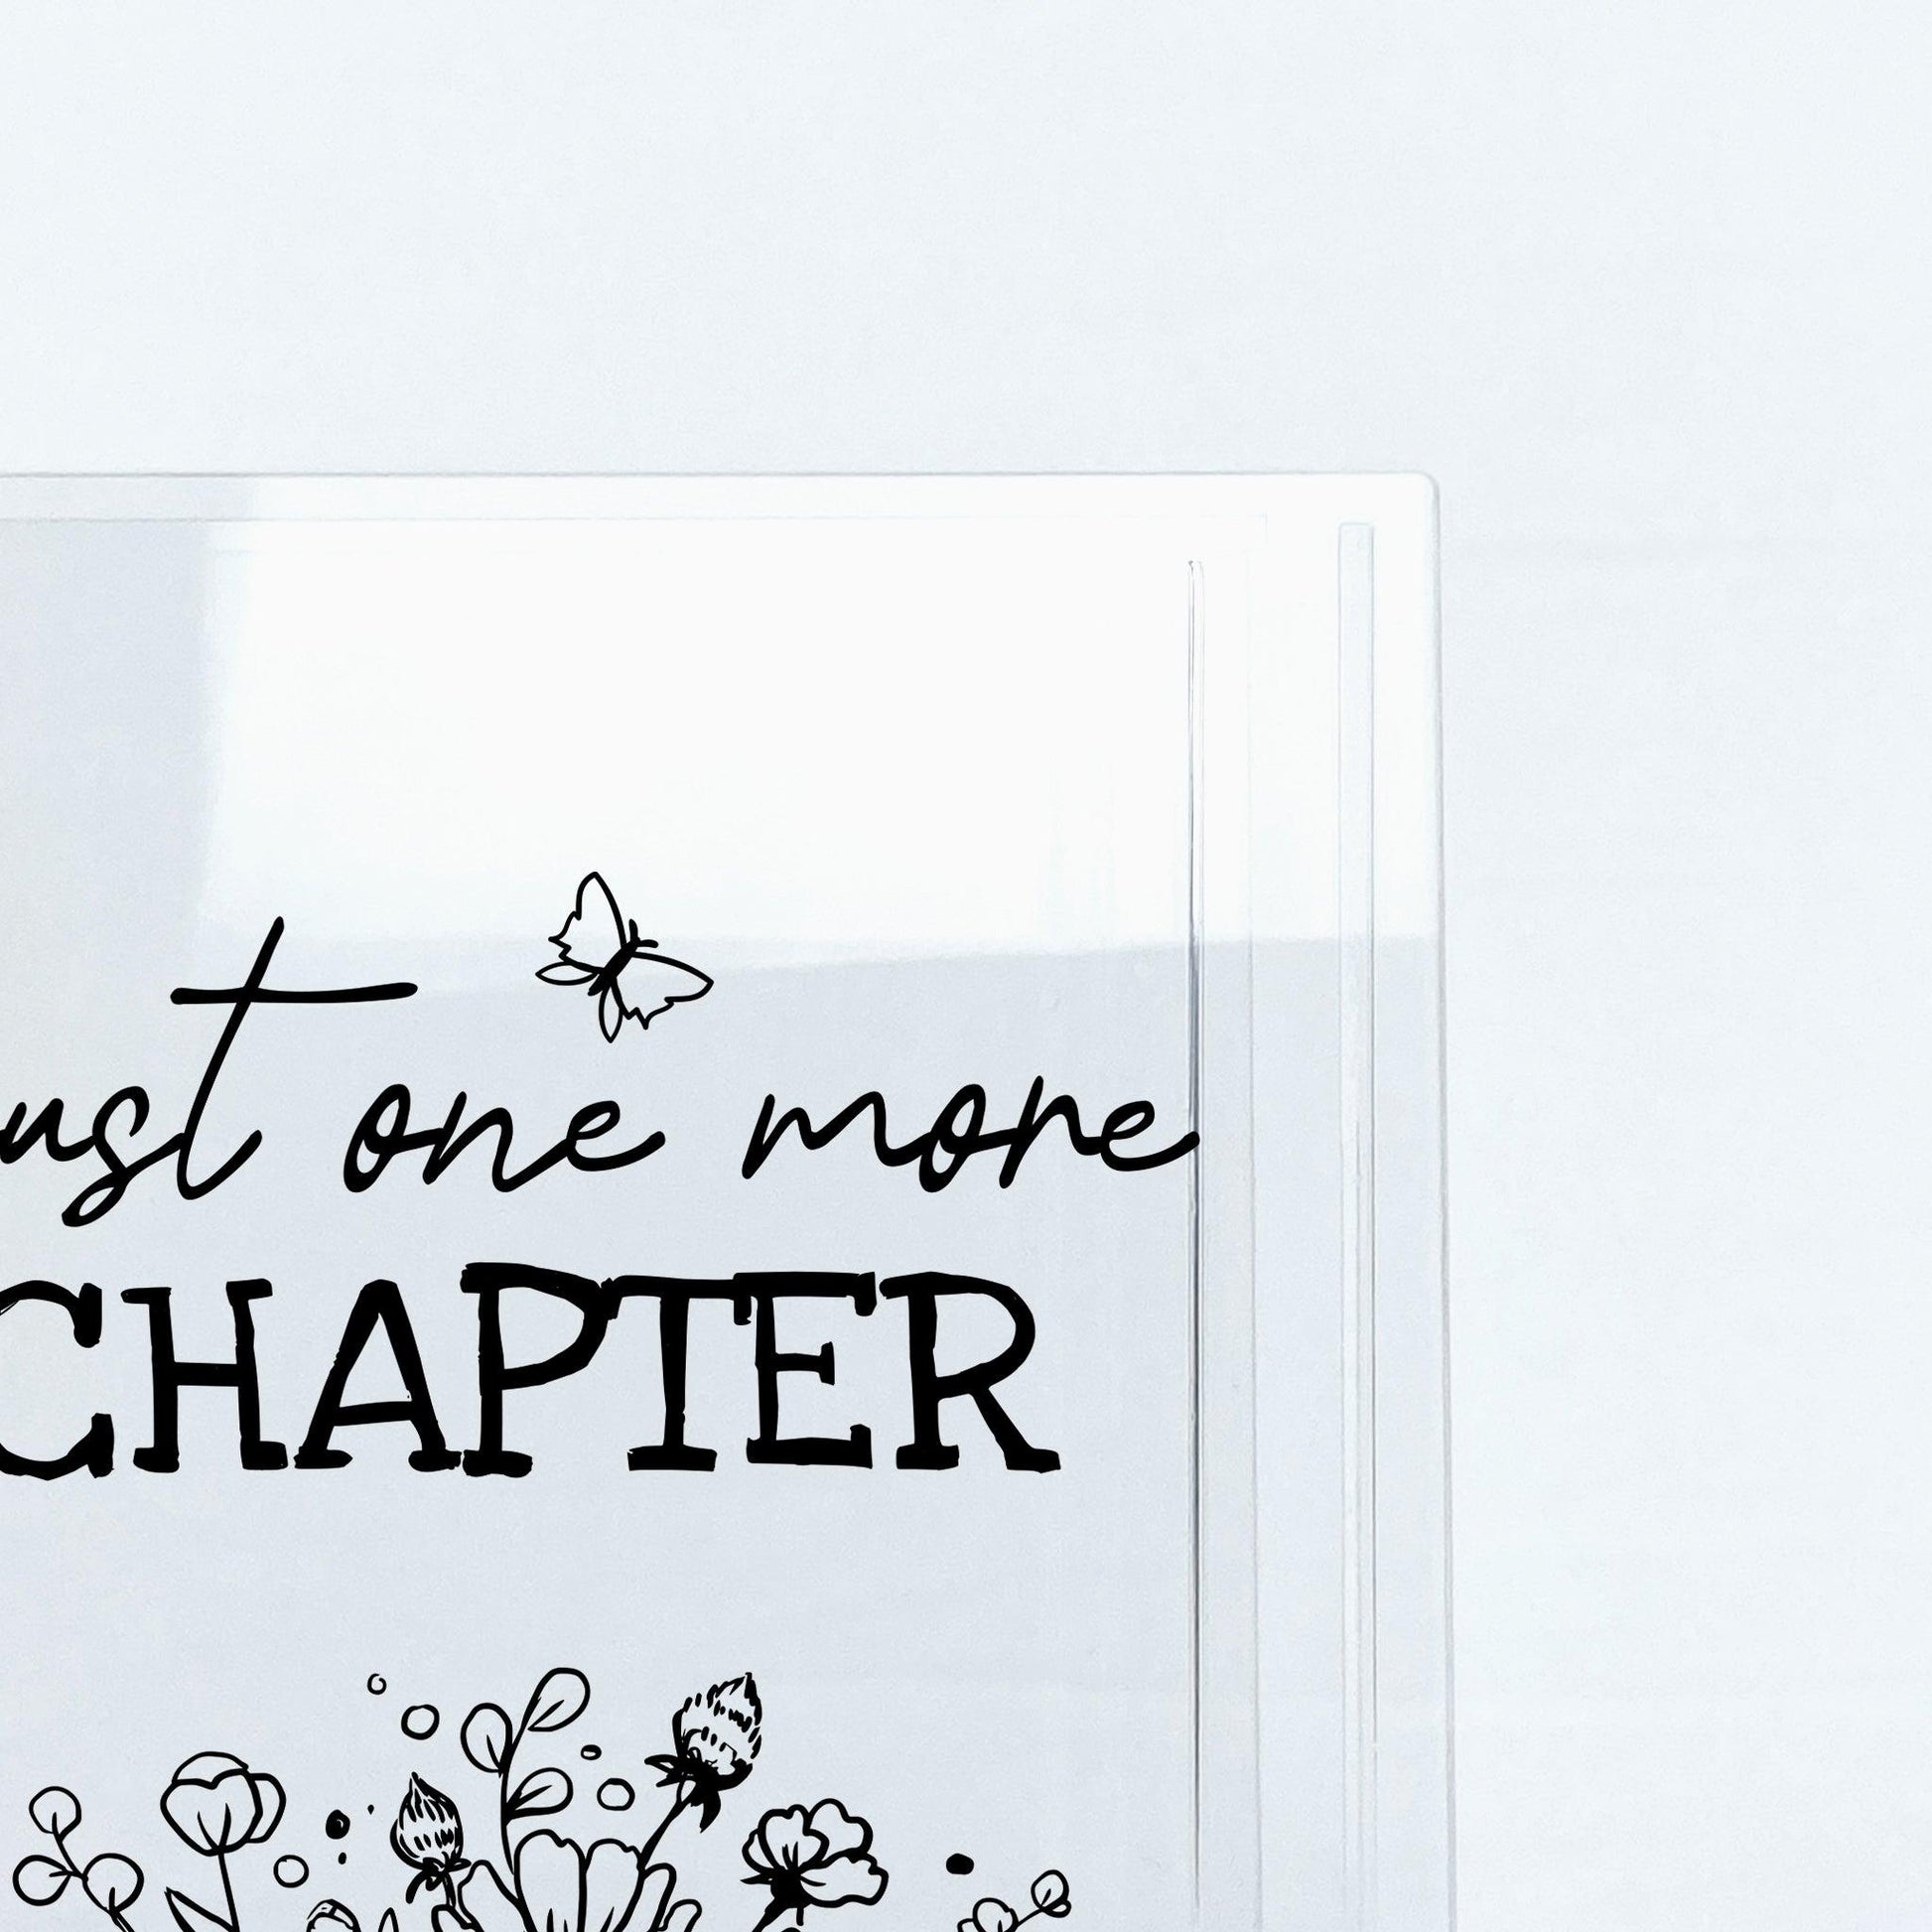 Just One More Chapter Acrylic Book Vase - Biblio Bloom